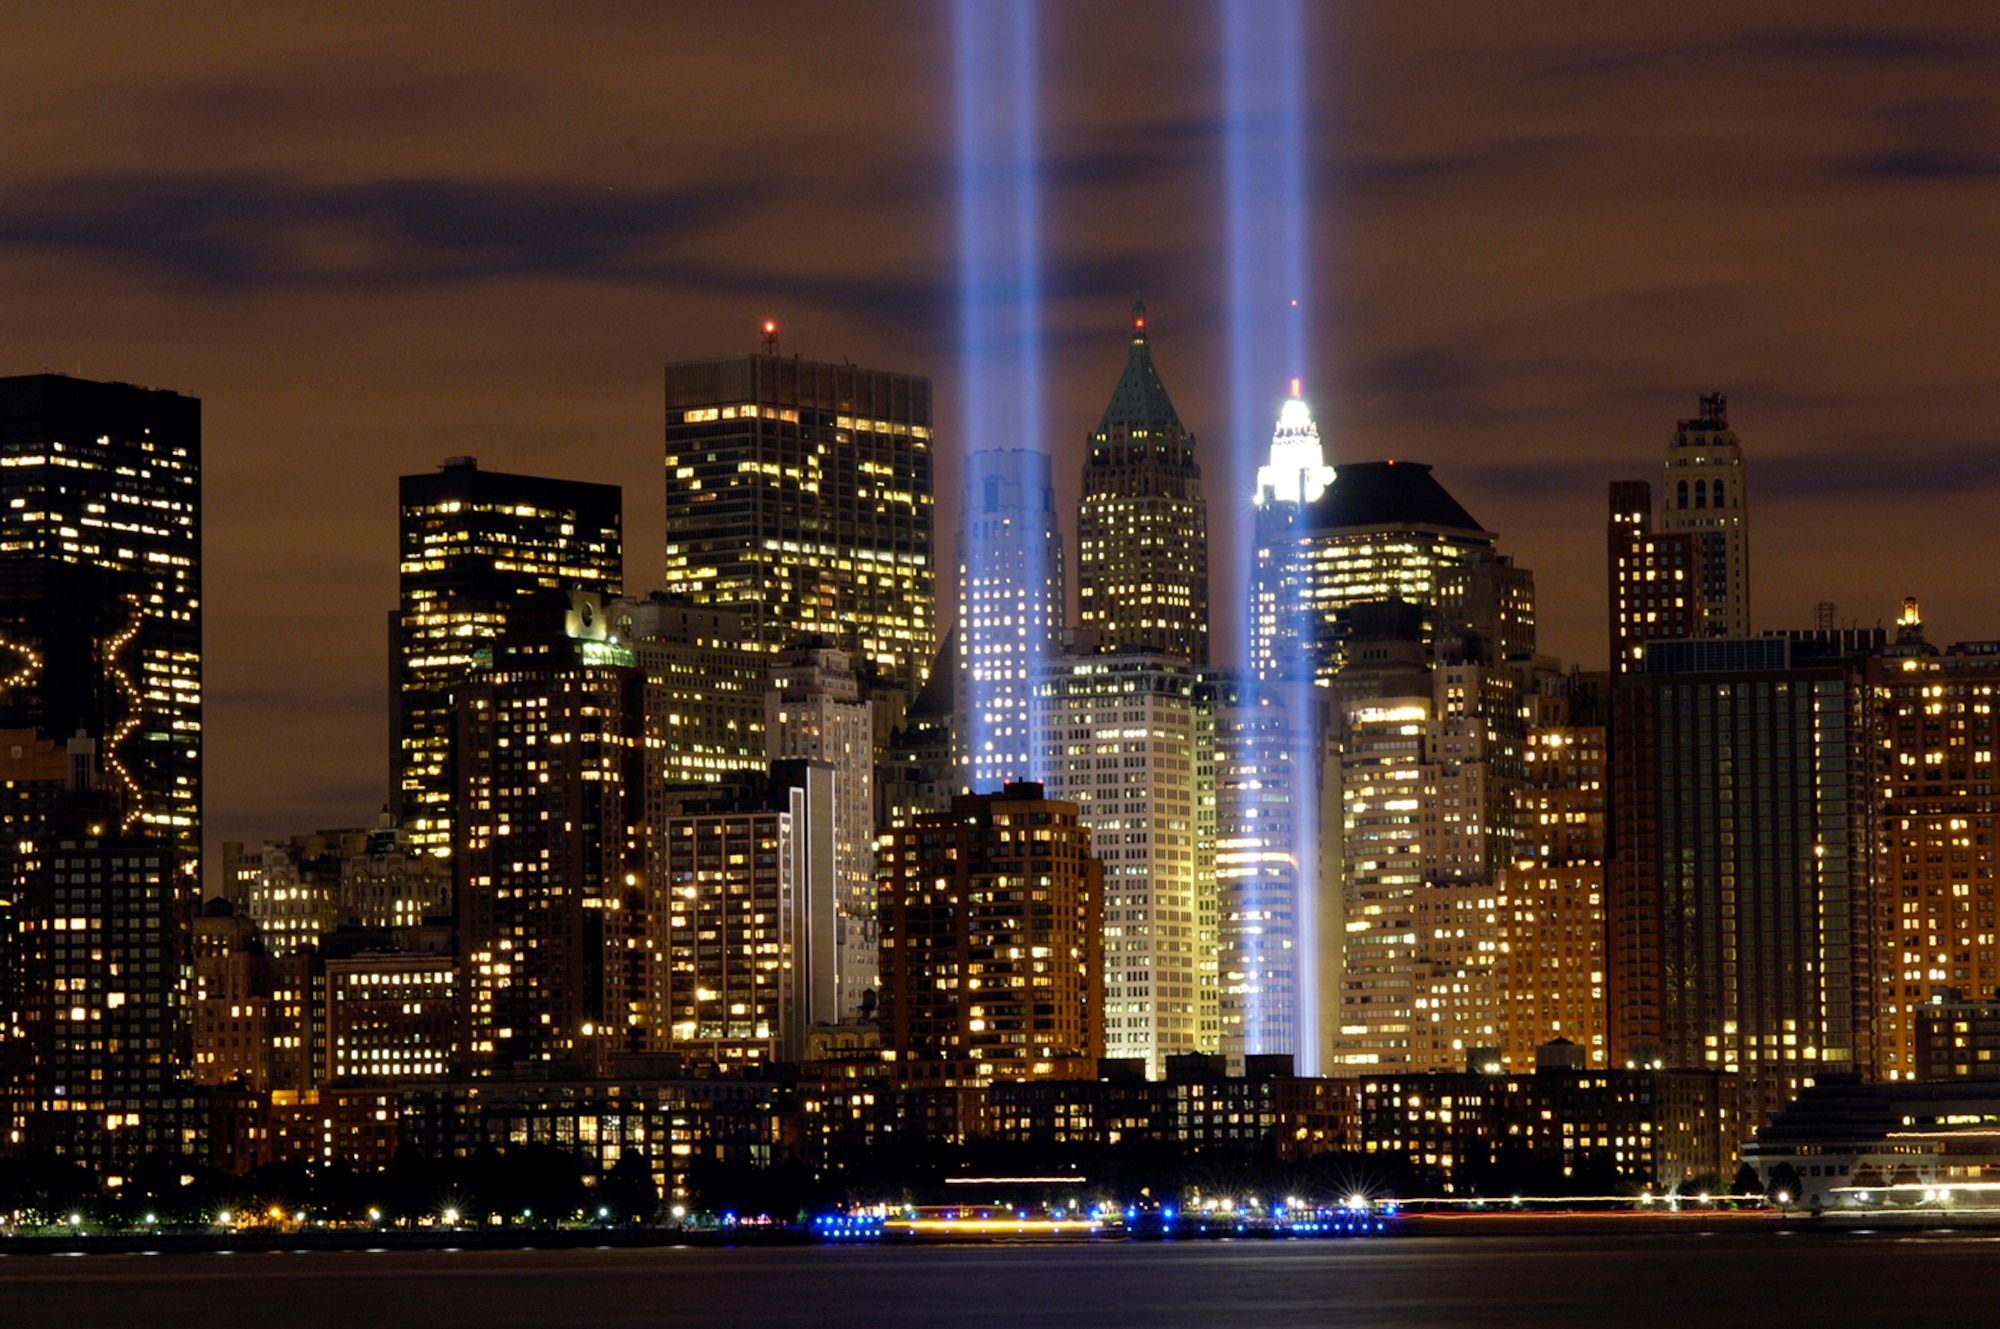 The "Tribute in Light" memorial is in remembrance of the events of Sept. 11, 2001, in honor of the citizens who lost their lives in the World Trade Center attacks. The memorial was first held in March 2002. This photo was taken from Liberty State Park, N.J., on Sept. 11, 2006, the five year anniversary of 9/11. (U.S. Air Force photo/Denise Gould)